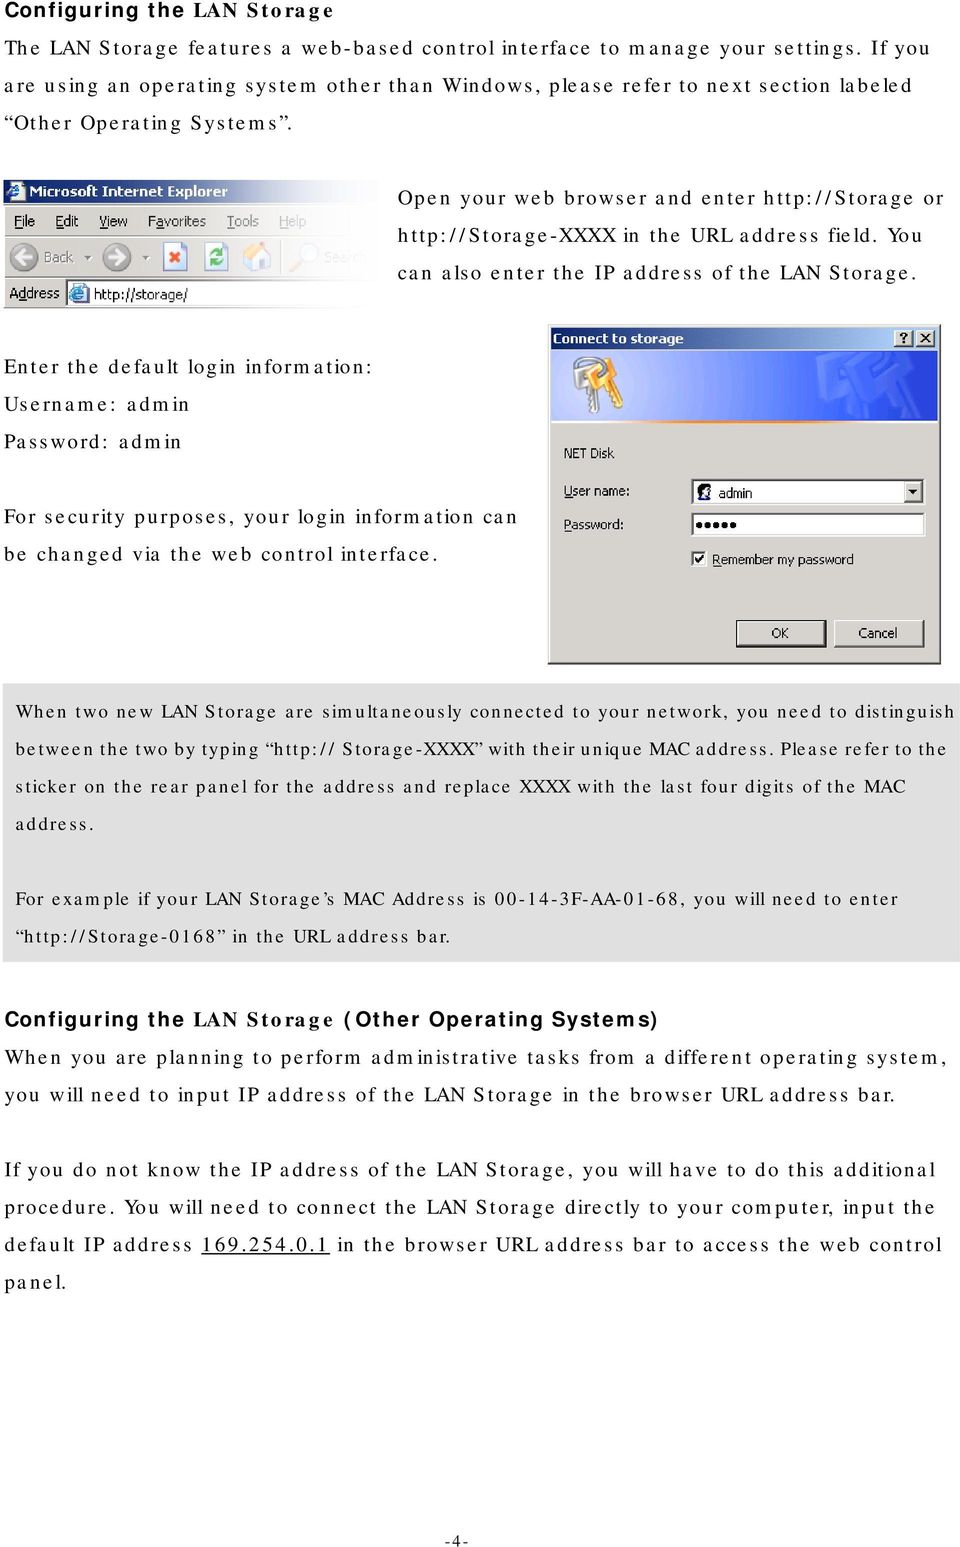 Open your web browser and enter http://storage or http://storage-xxxx in the URL address field. You can also enter the IP address of the LAN Storage.